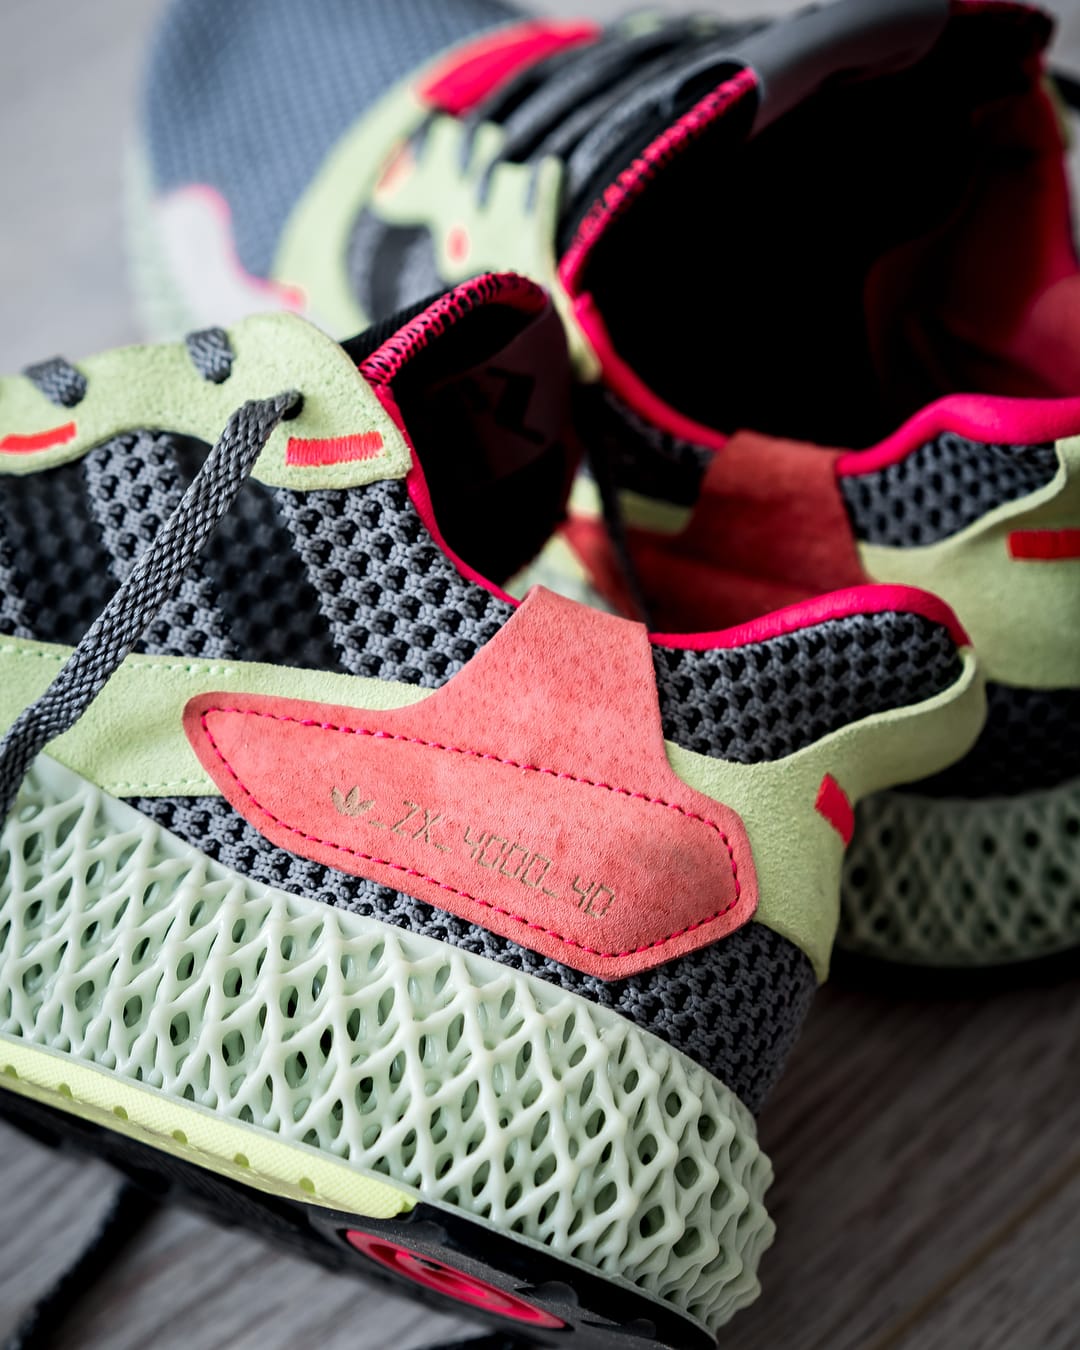 Another Colorway of the Adidas ZX 4000 4D | Complex